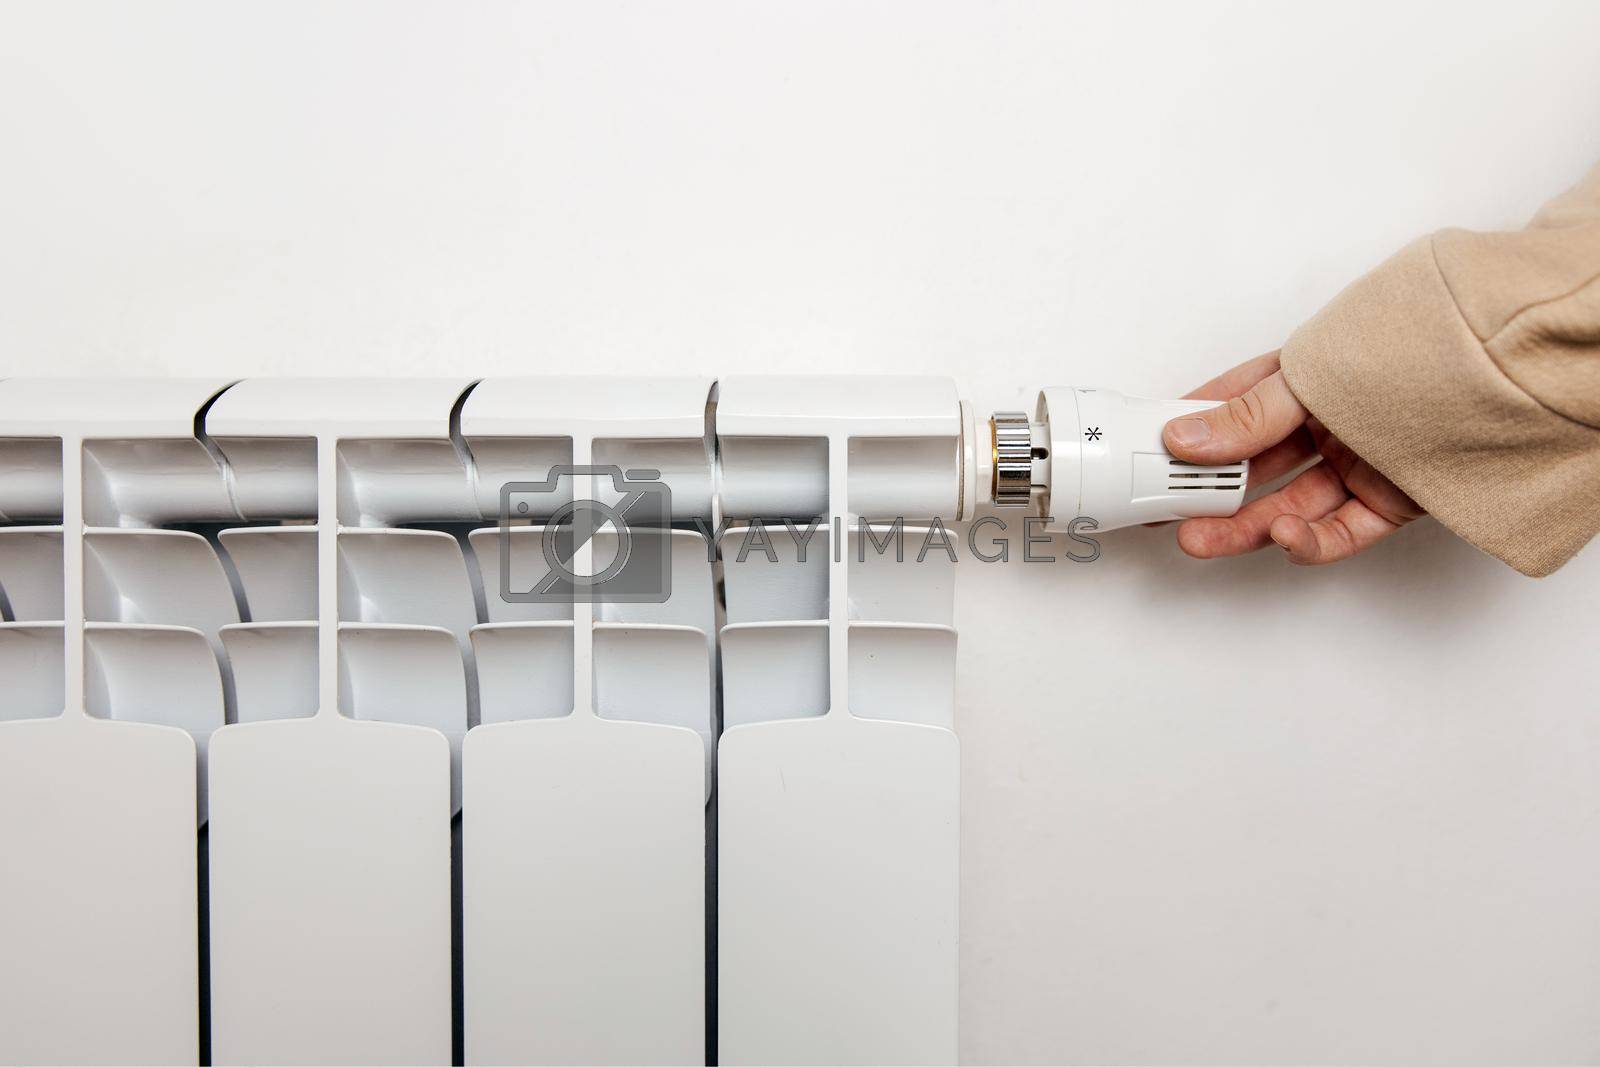 Royalty free image of White heating radiator hanging on white wall, close up view. Person turns on or turns off radiator. Central heating system. Heating is getting more expensive, save money. Energy crisis. Copy space. by creativebird